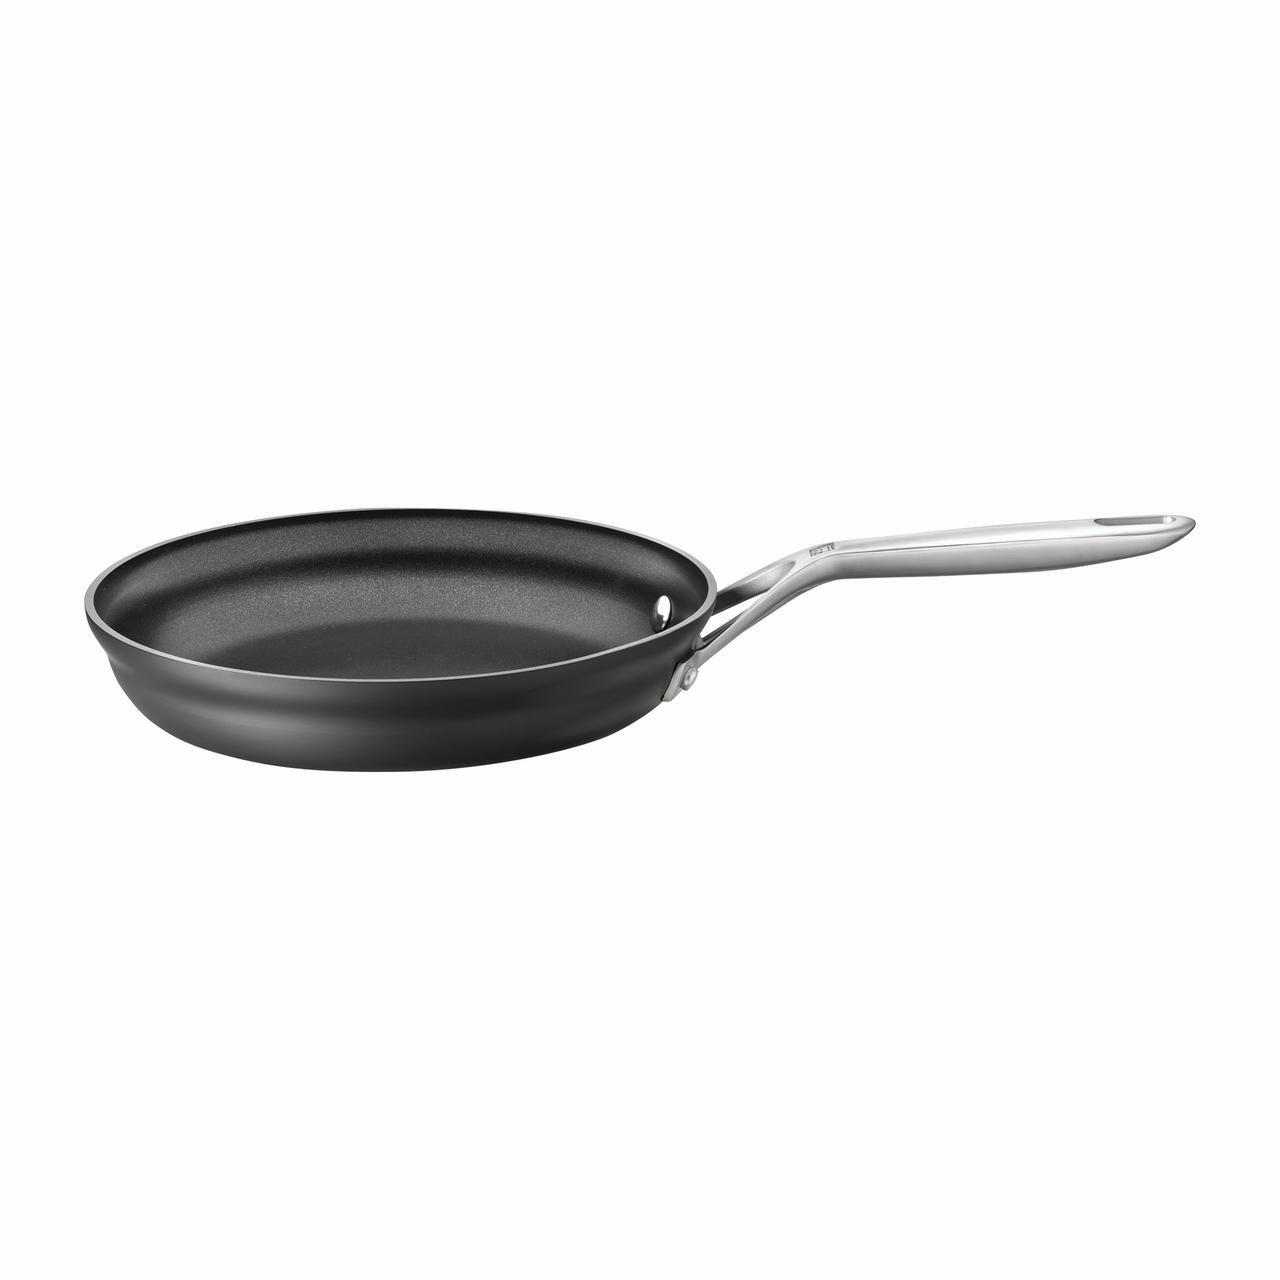 https://cdn11.bigcommerce.com/s-hccytny0od/images/stencil/1280x1280/products/2744/9778/zwilling-motion-nonstick-fry-pan-10in__26183.1566033095.jpg?c=2?imbypass=on